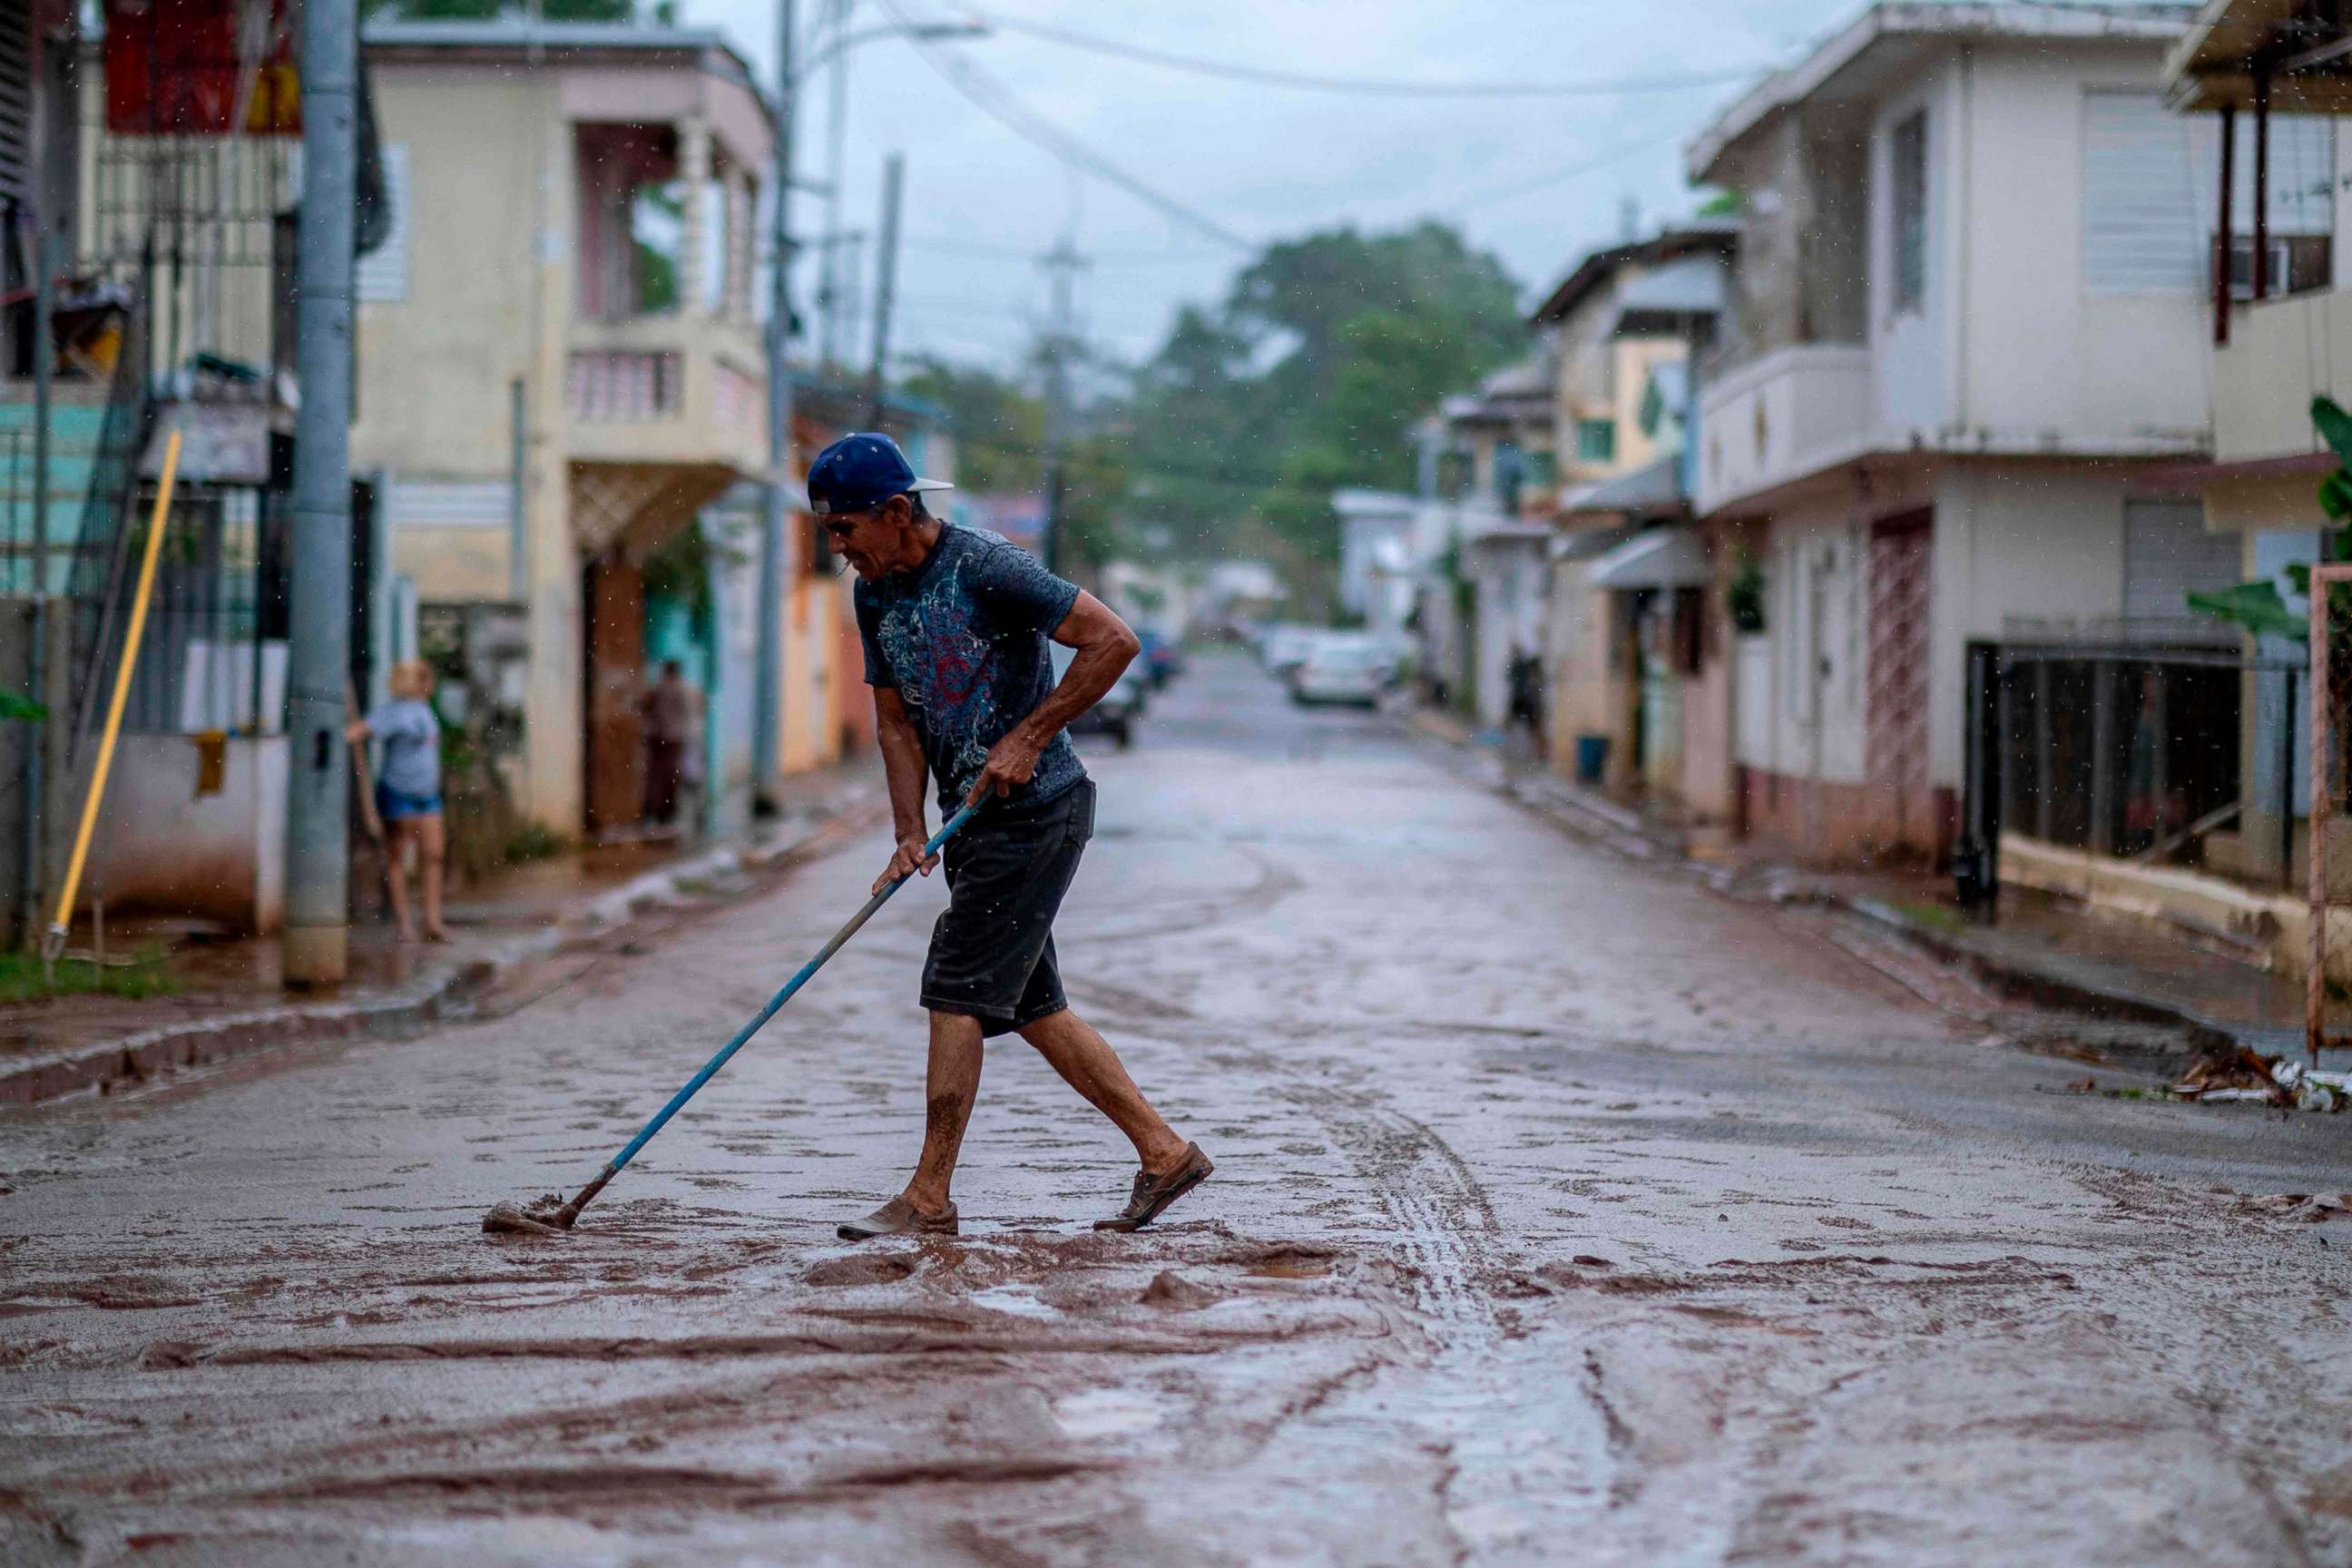 PHOTO: A man sweeps mud from a street after Tropical Storm Isaias swept through the area in Mayaguez, Puerto Rico, July 30, 2020.